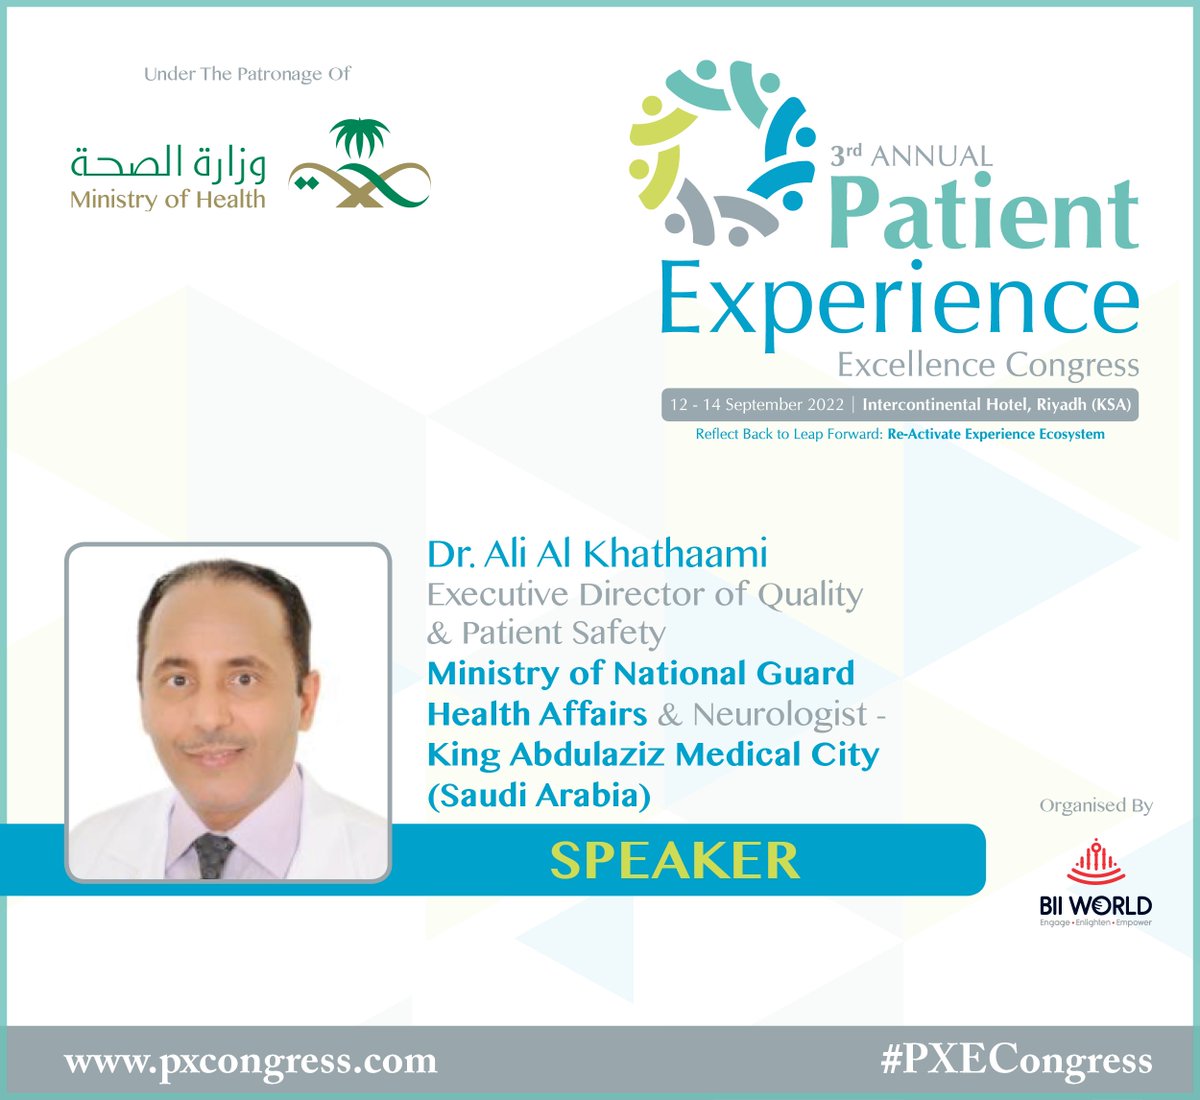 Dr. Ali M. Al Khathaami, will be sharing his insights on 'Enhancing the #patientexperience Ownership among #frontlinestaff: The Do’s & Don’ts' during his exclusive presentation at the 3rd Annual #PXECongress.
Register: pxcongress.com/register/ #patientcare #PatientSafety